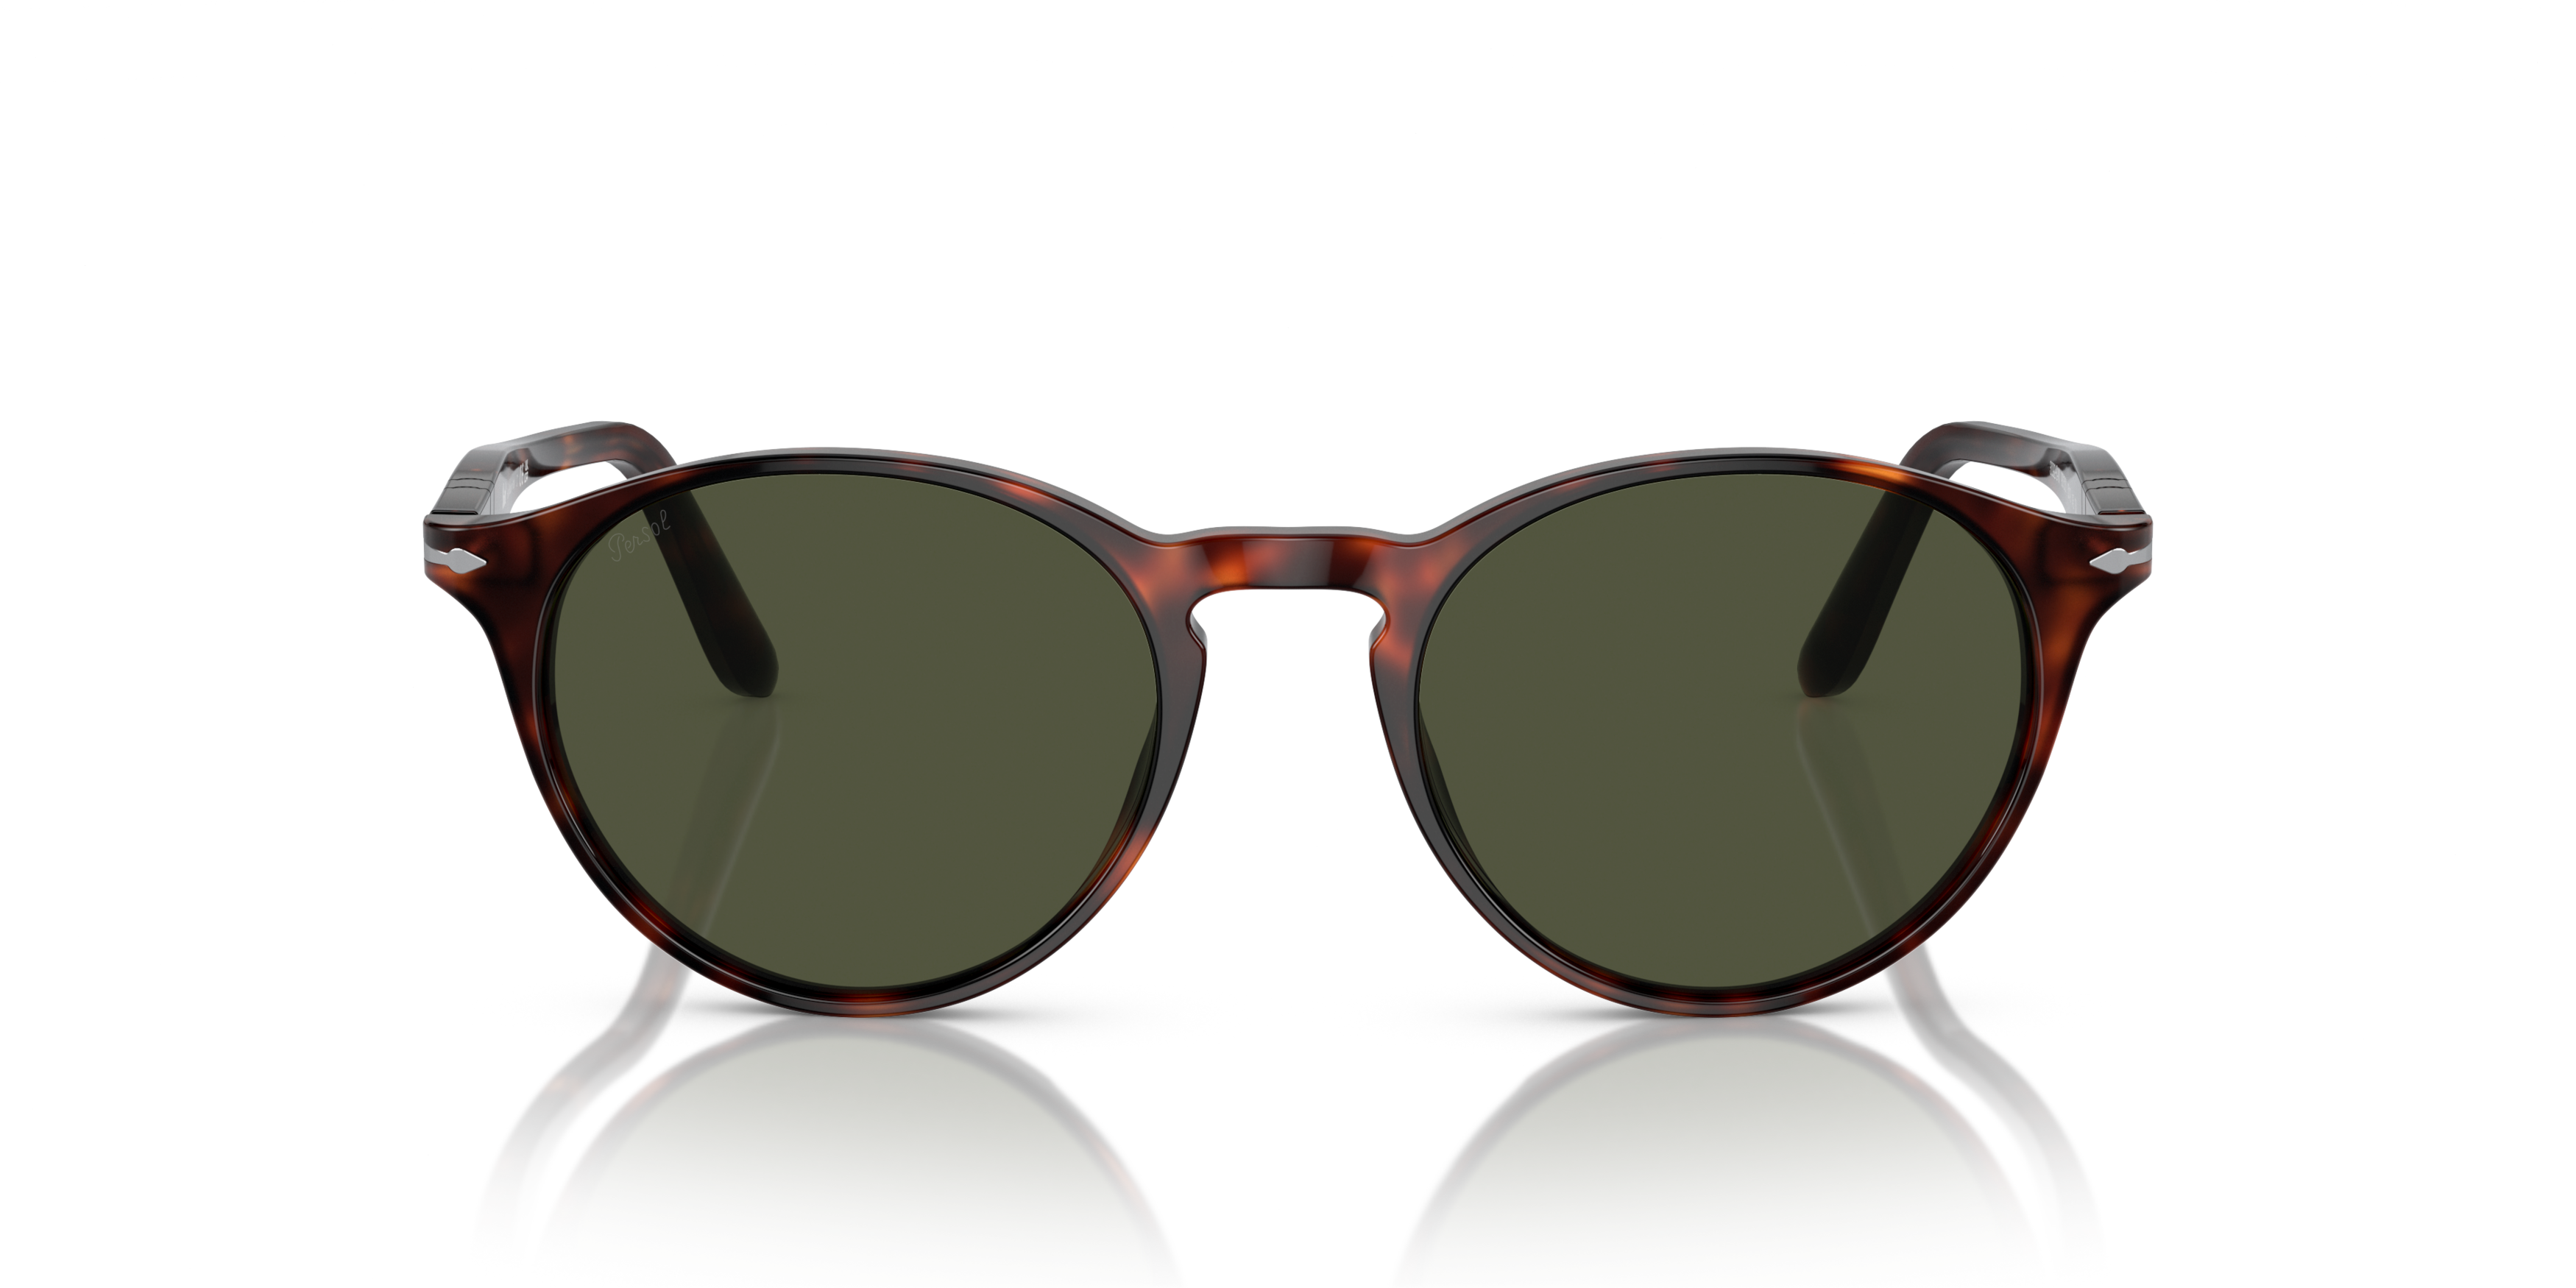 [products.image.front] Persol 0PO3092SM 901531